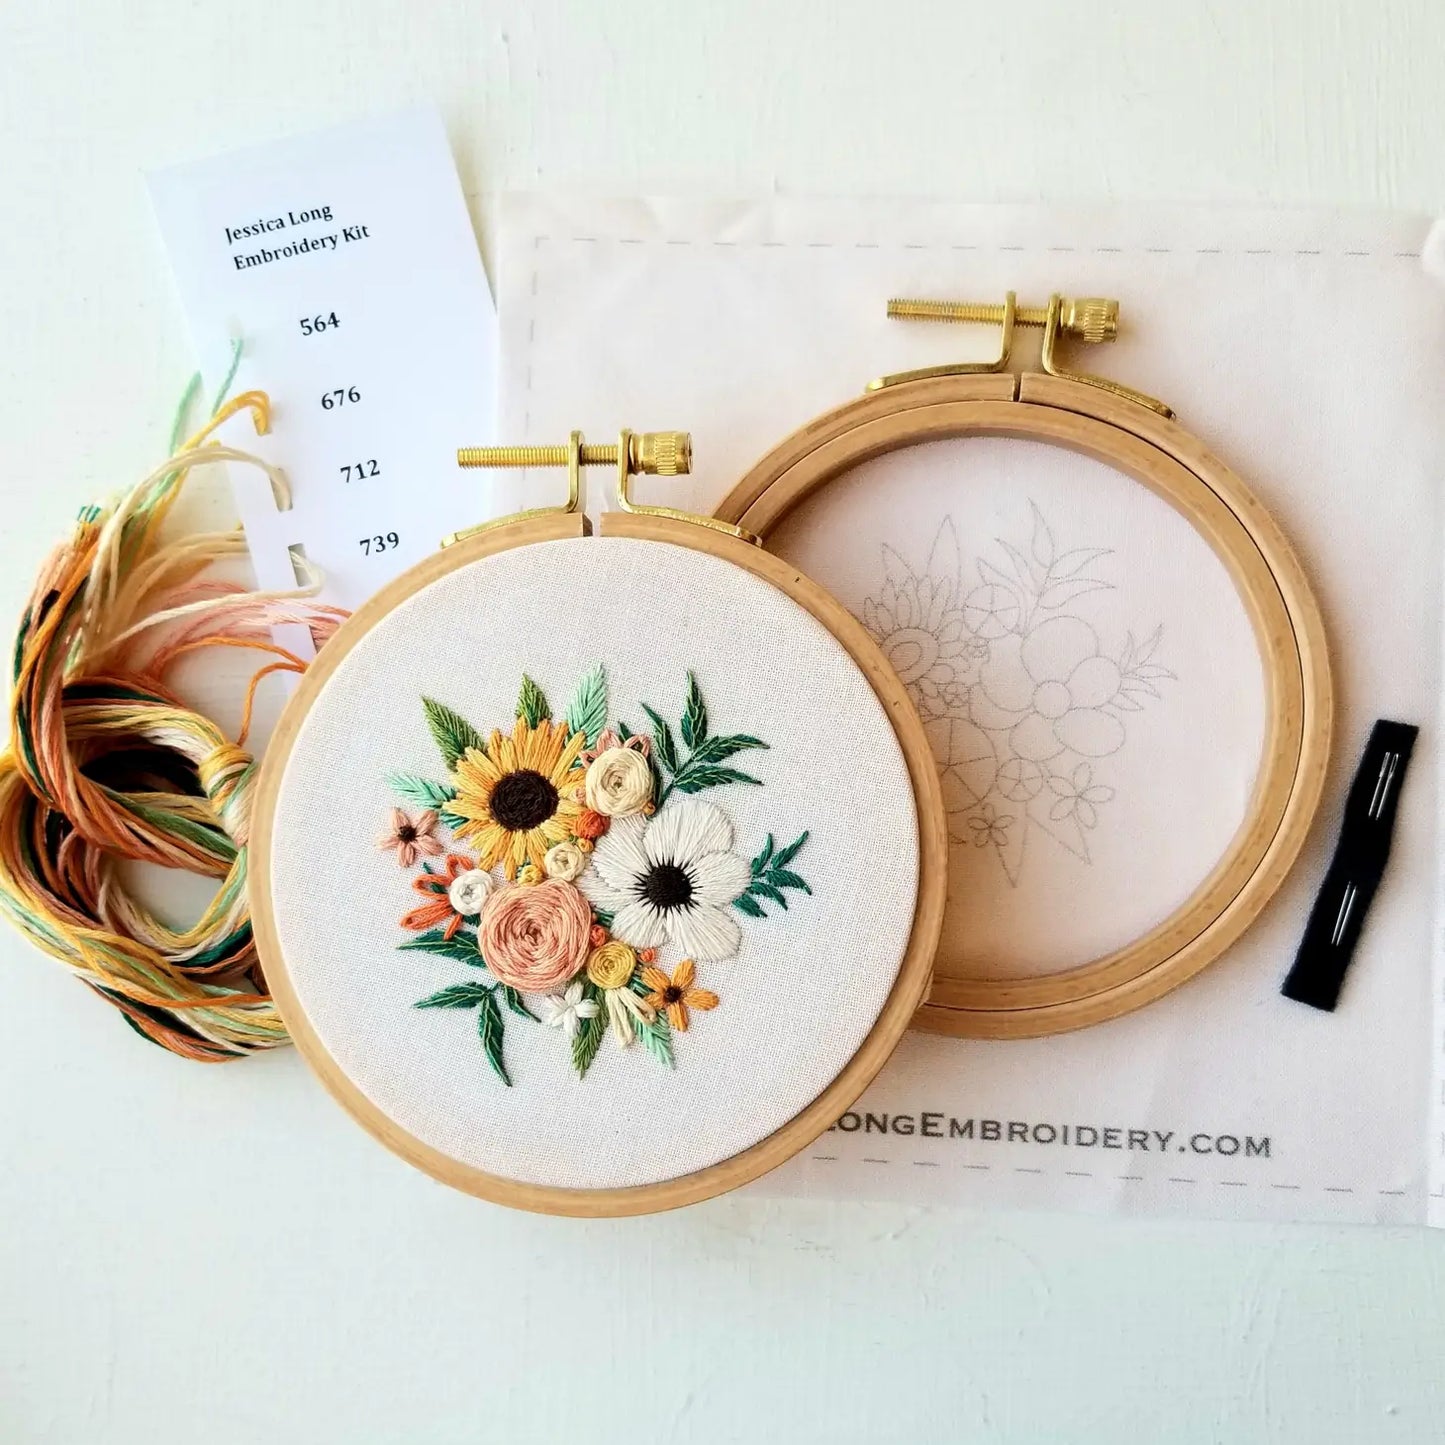 Beginner Hand Embroidery Kits